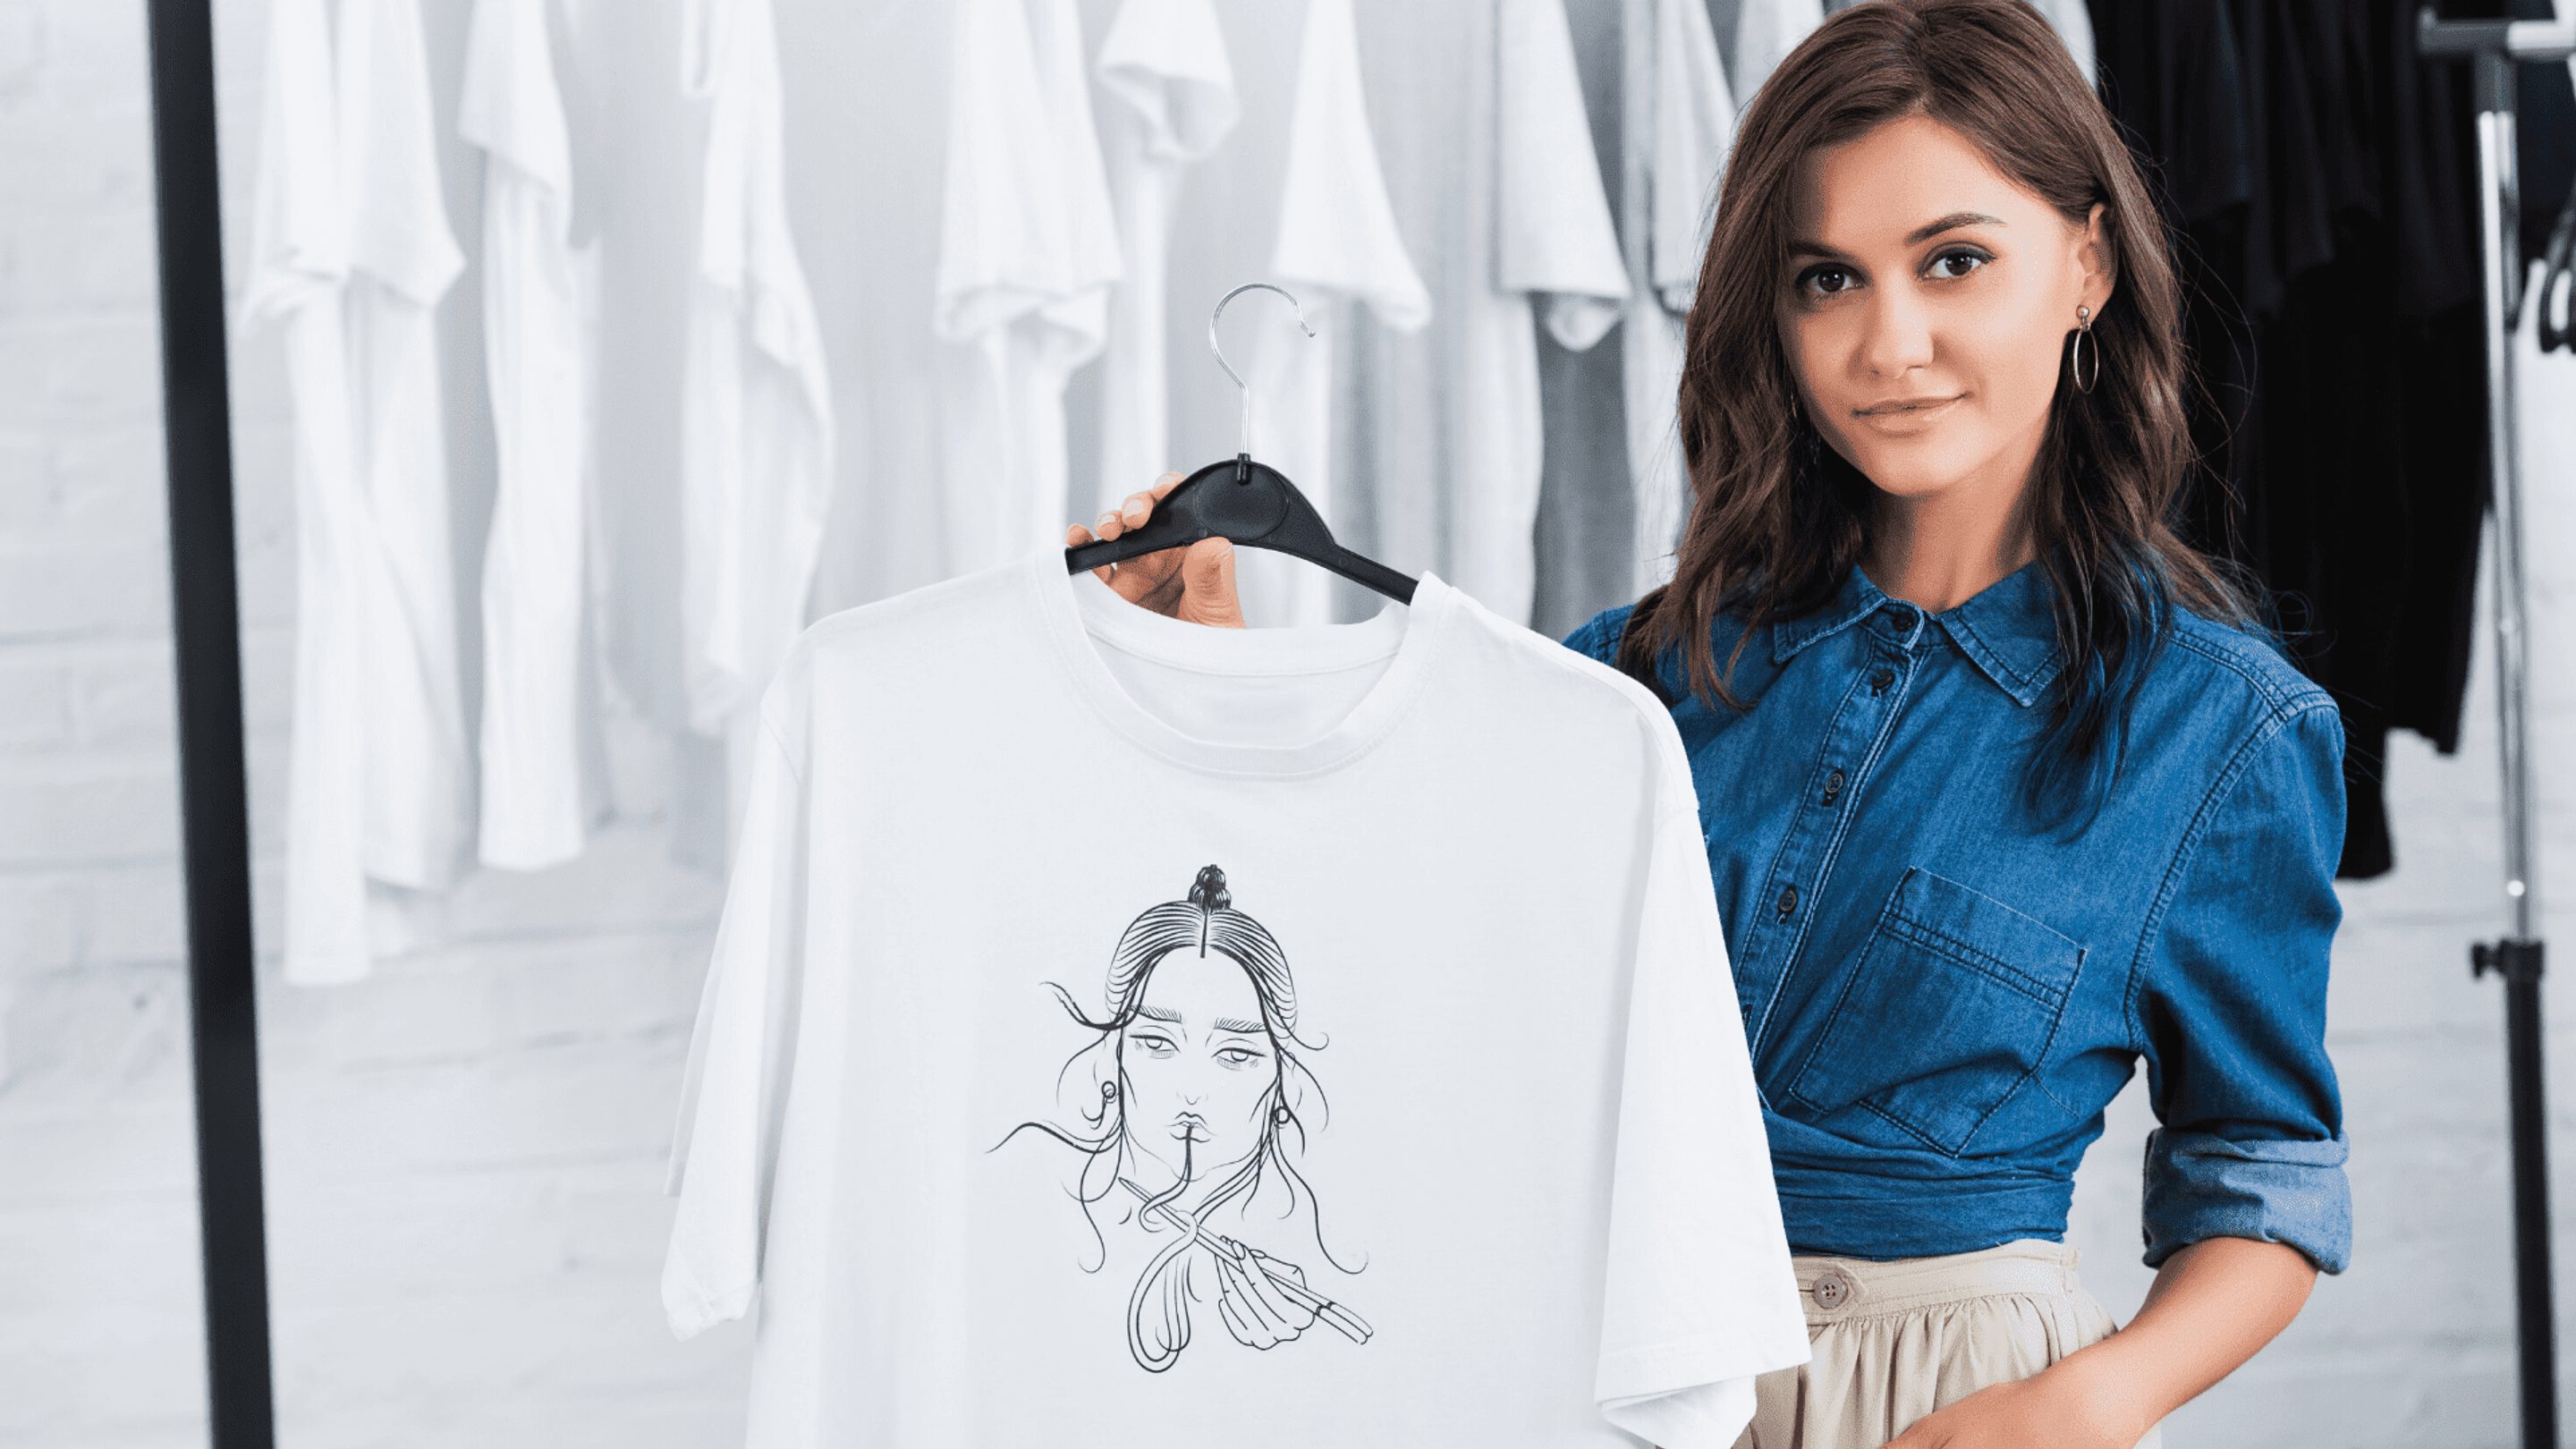 Step-by-step guide on designing custom t-shirts for your business